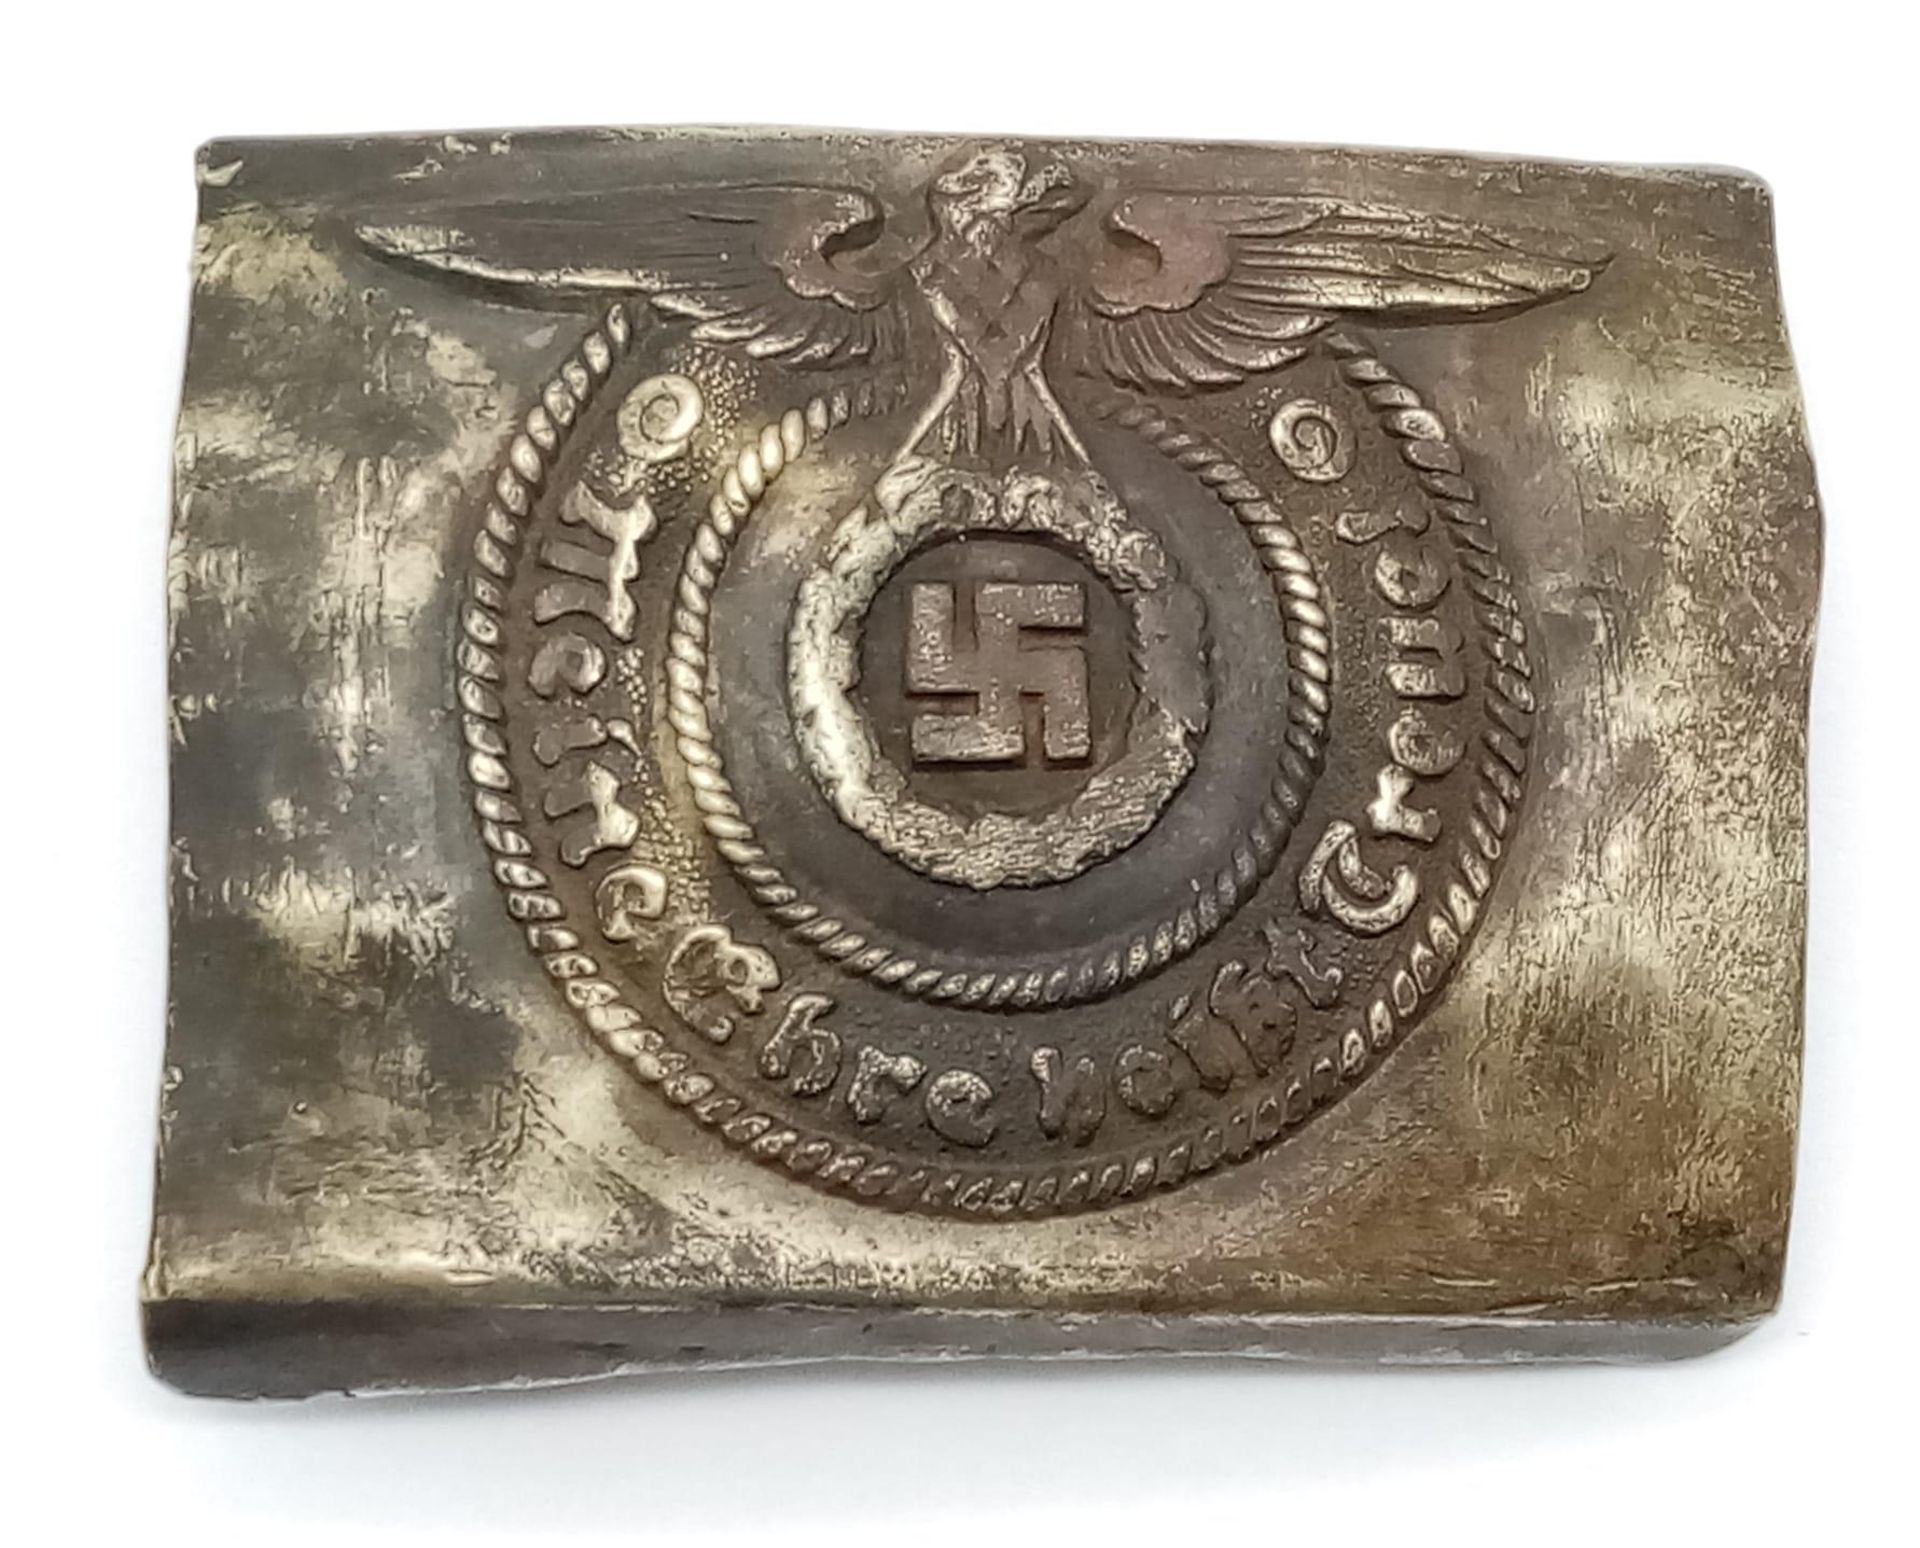 WW2 German Waffen SS 15th Grenadier Lett Land (Latvia) Division Buckle. The buckle was found in